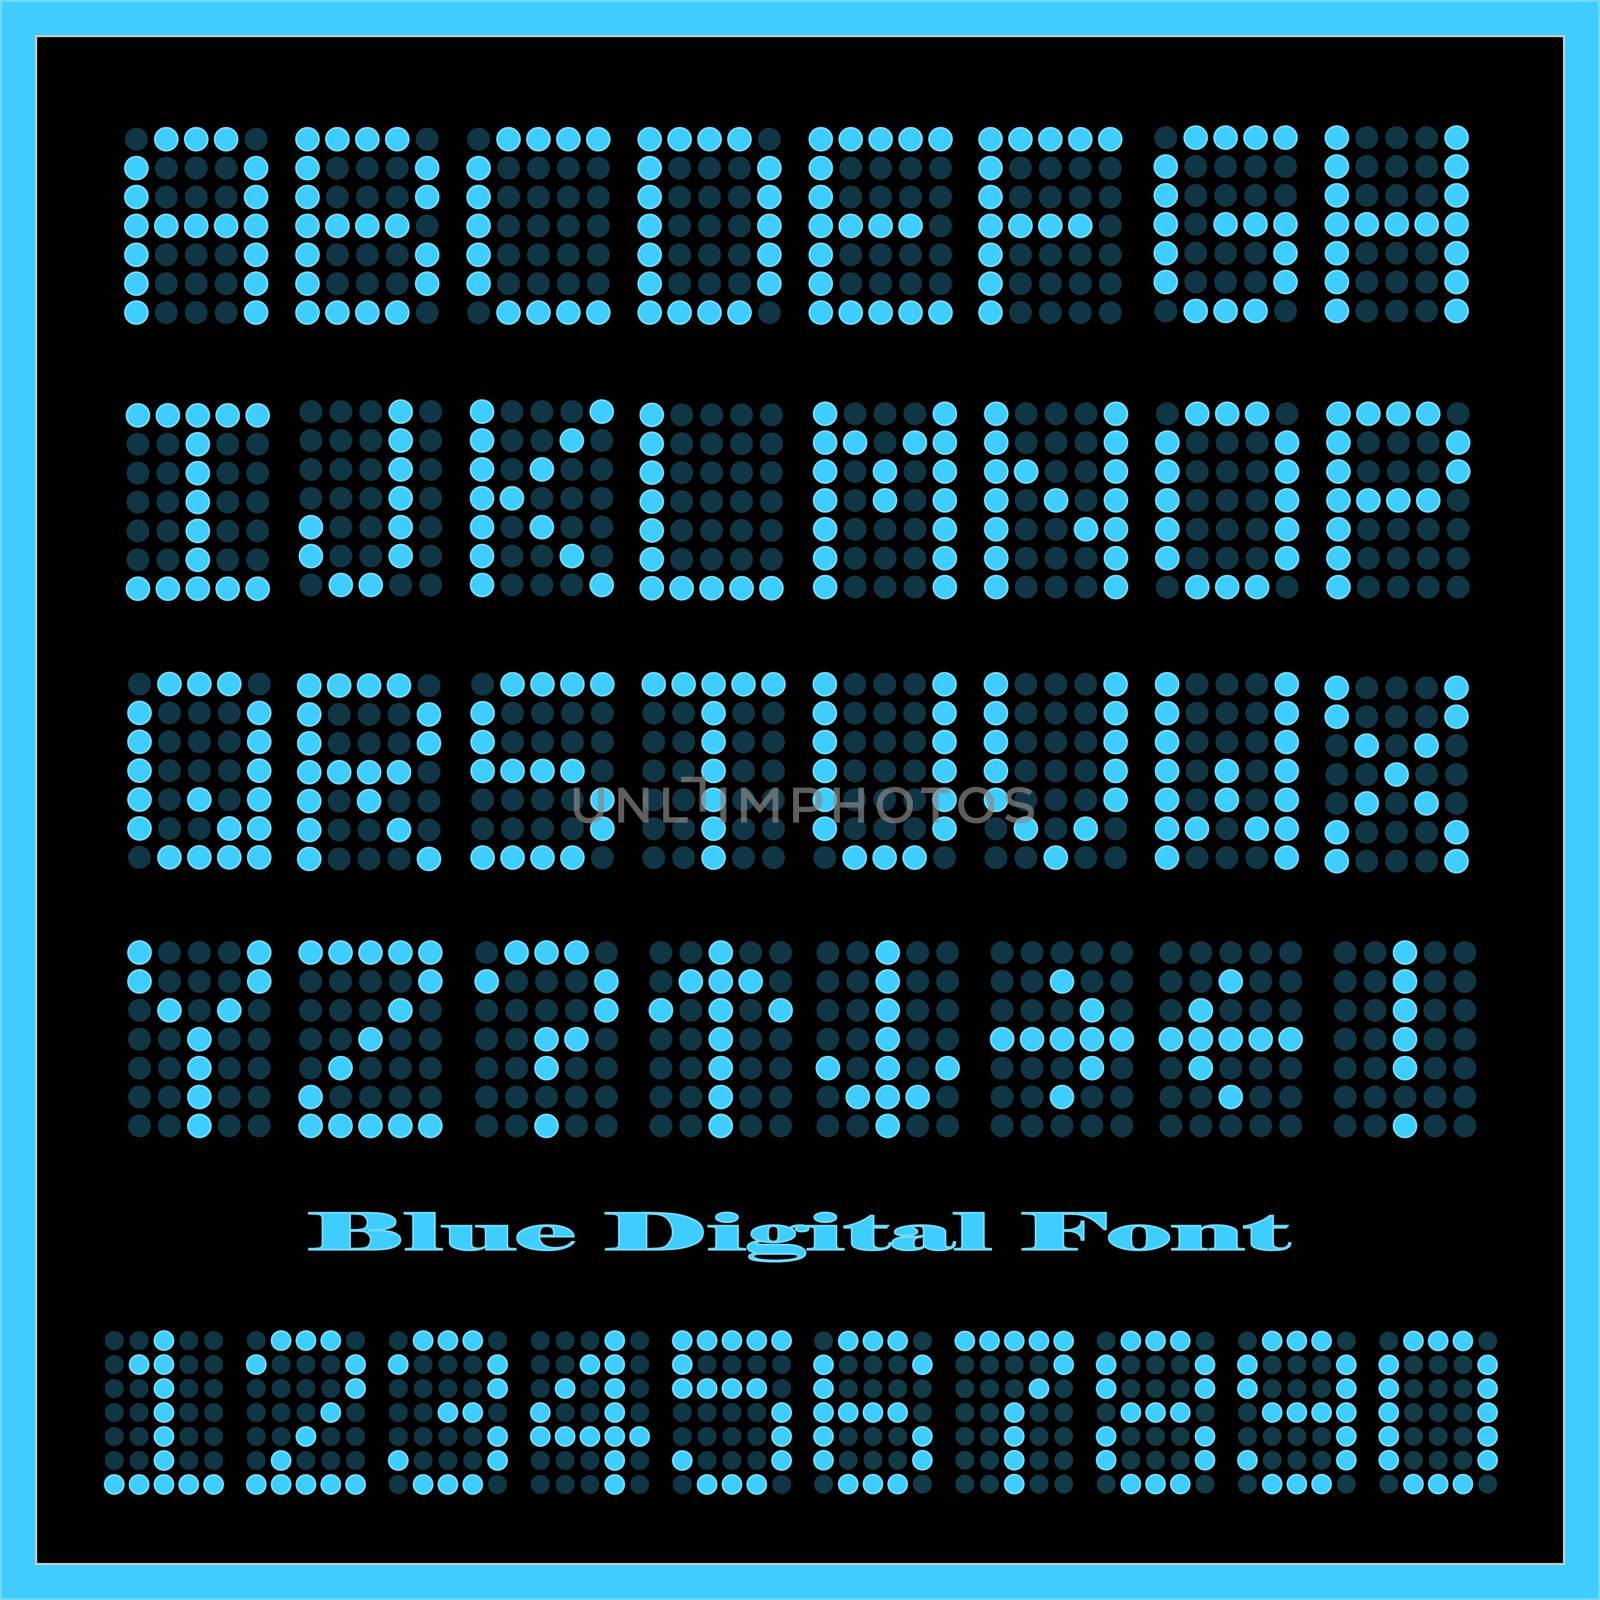 Blue Digital Font by nmarques74